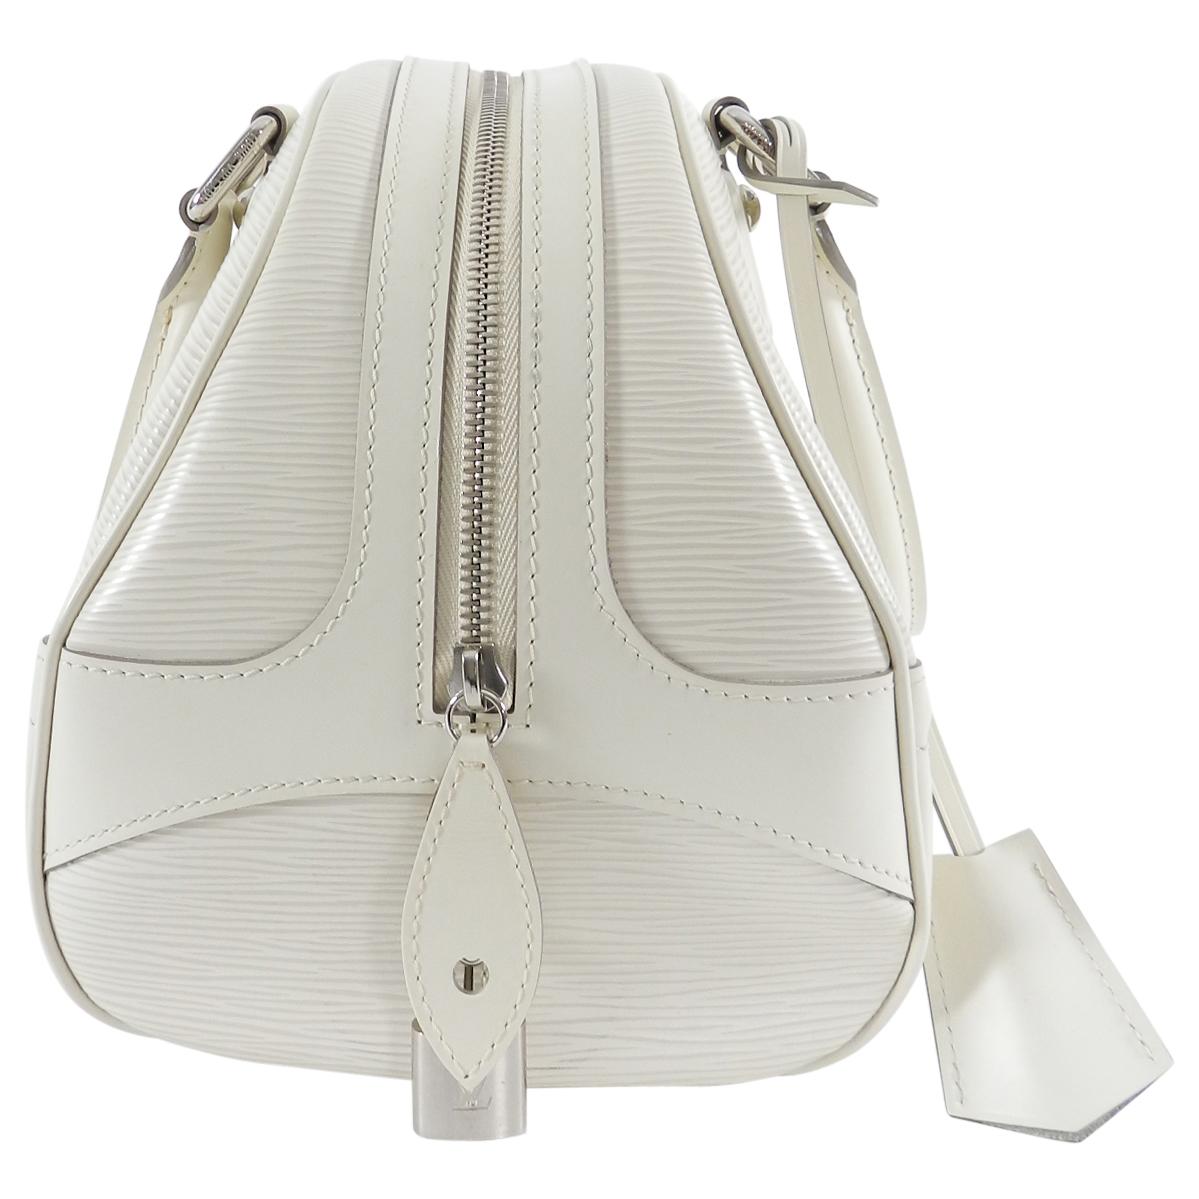 Louis Vuitton Ivory Epi Bowling Montaigne PM Bag.  Zip top design with double handles, clochette, lock, 2 keys.  Ivory textured EPI leather with fabric lined interior and silvertone hardware.  Excellent pre-owned condition.  Date code MI2077 for